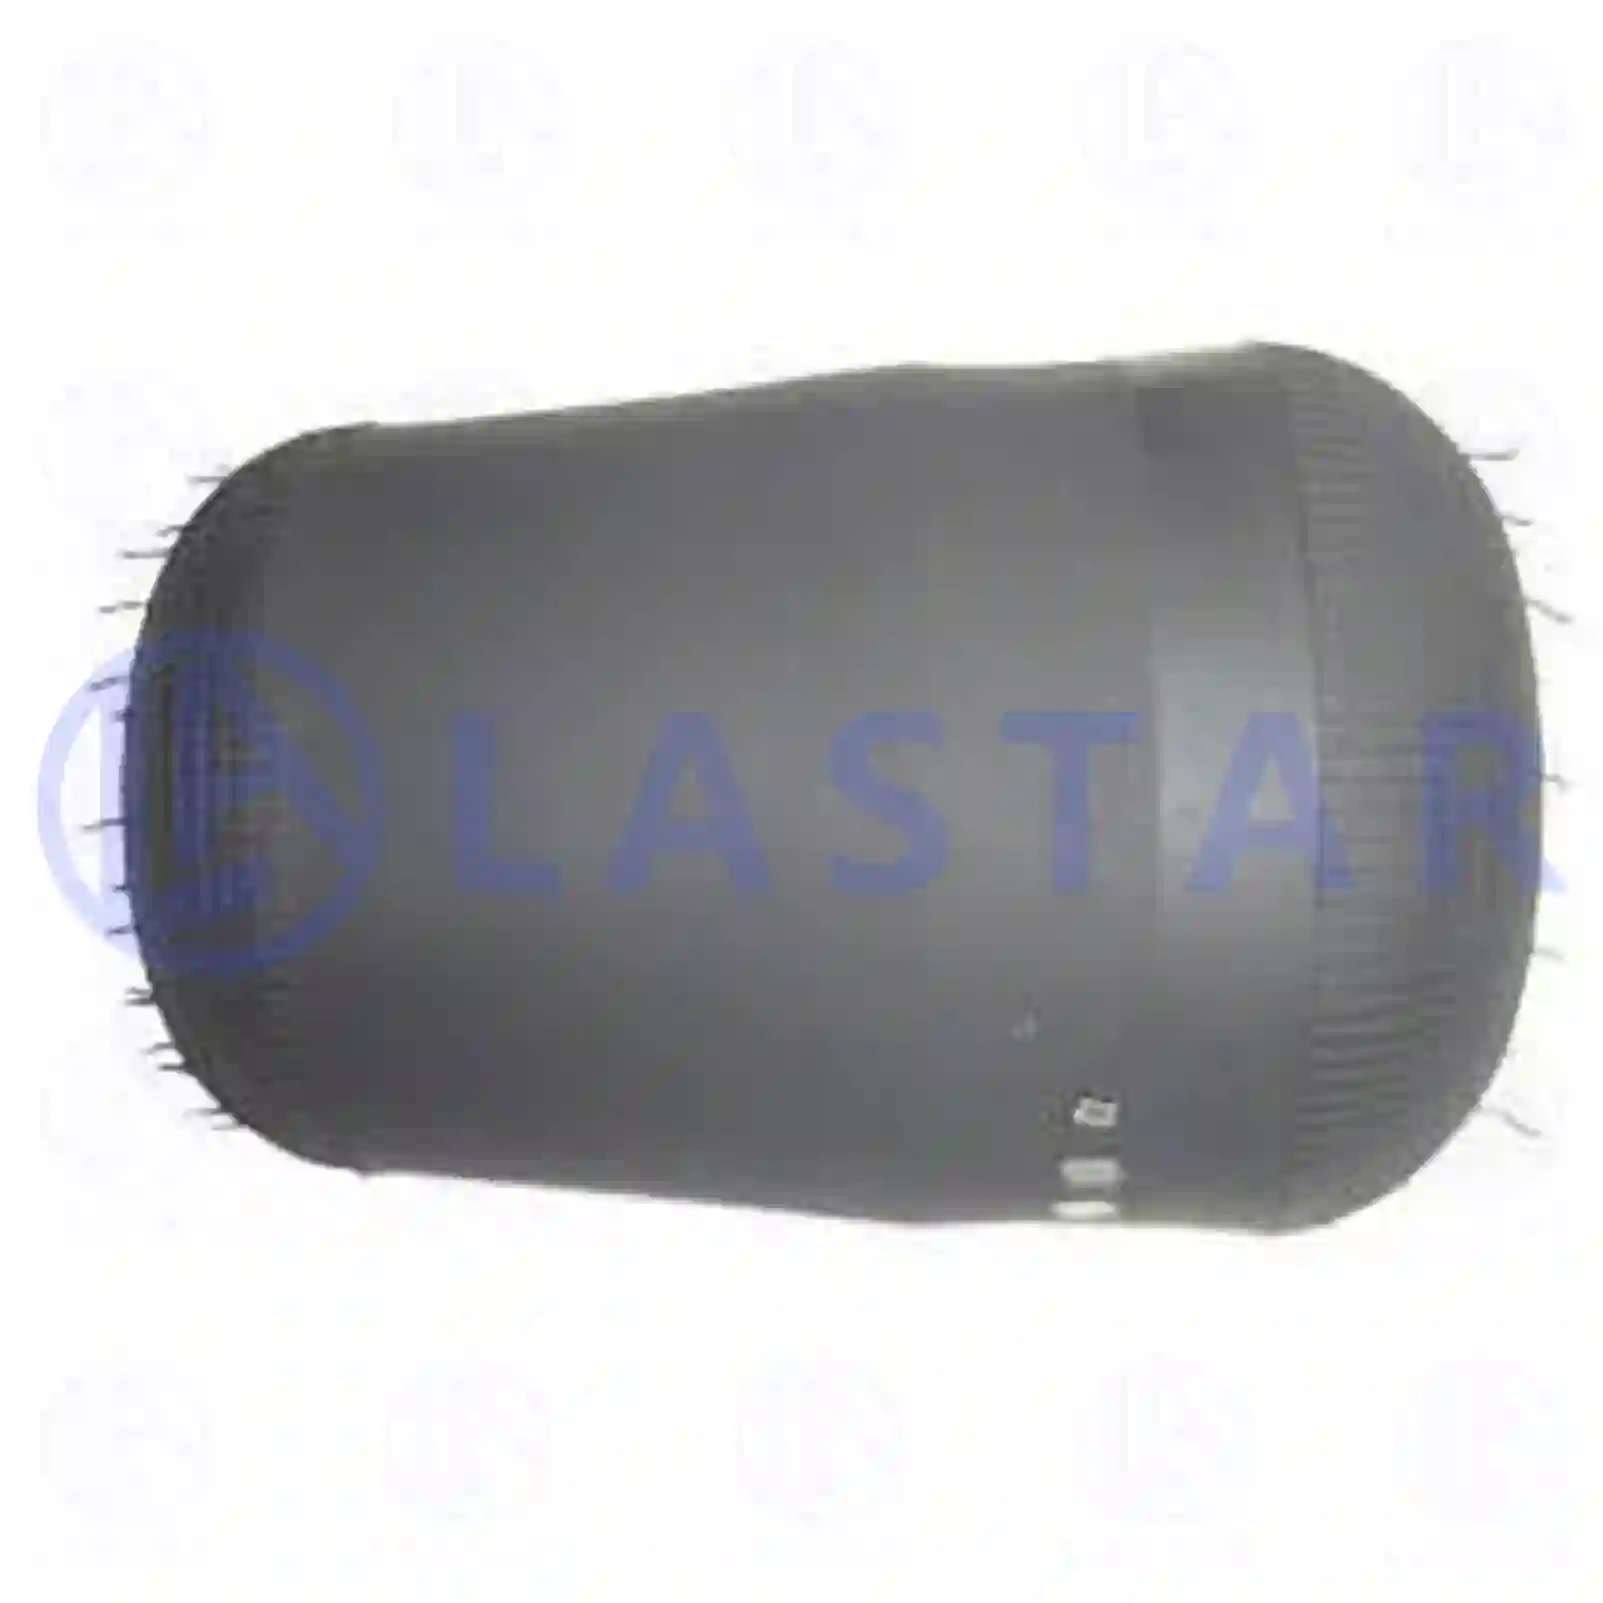 Air spring, without piston, 77728138, 3633280201, 363328020110, ||  77728138 Lastar Spare Part | Truck Spare Parts, Auotomotive Spare Parts Air spring, without piston, 77728138, 3633280201, 363328020110, ||  77728138 Lastar Spare Part | Truck Spare Parts, Auotomotive Spare Parts